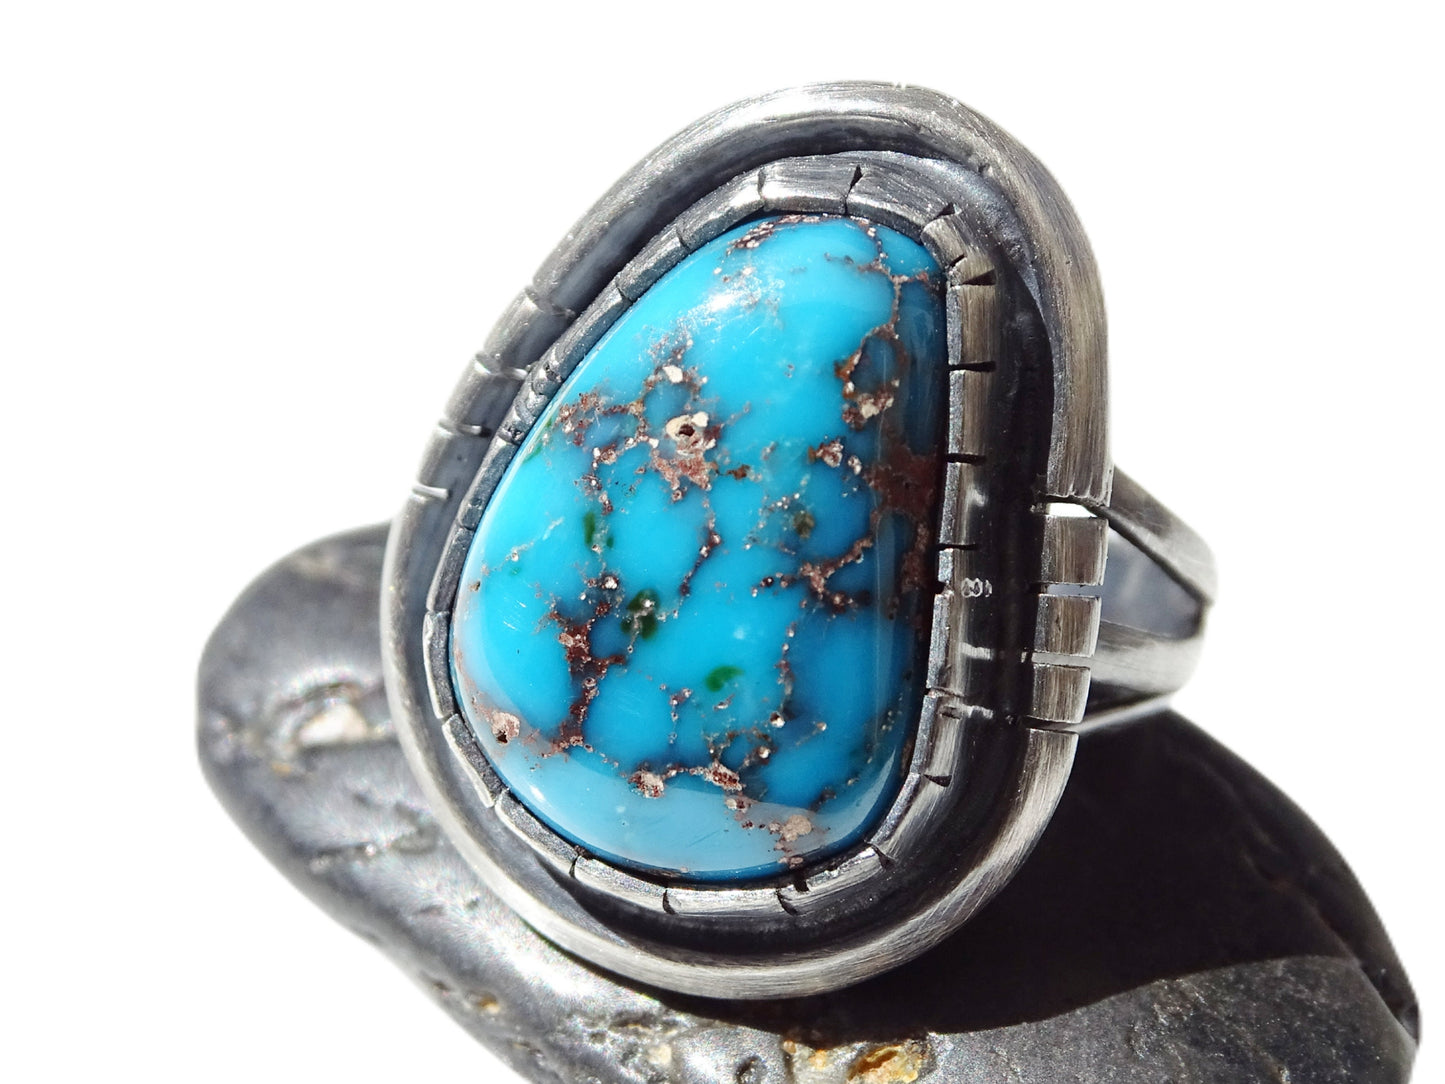 black silver turquoise ring, Morenci turquoise band, blue turquoise ring silver, shadowbox ring silver anniversary gift, unique gift for her - CrazyAss Jewelry Designs